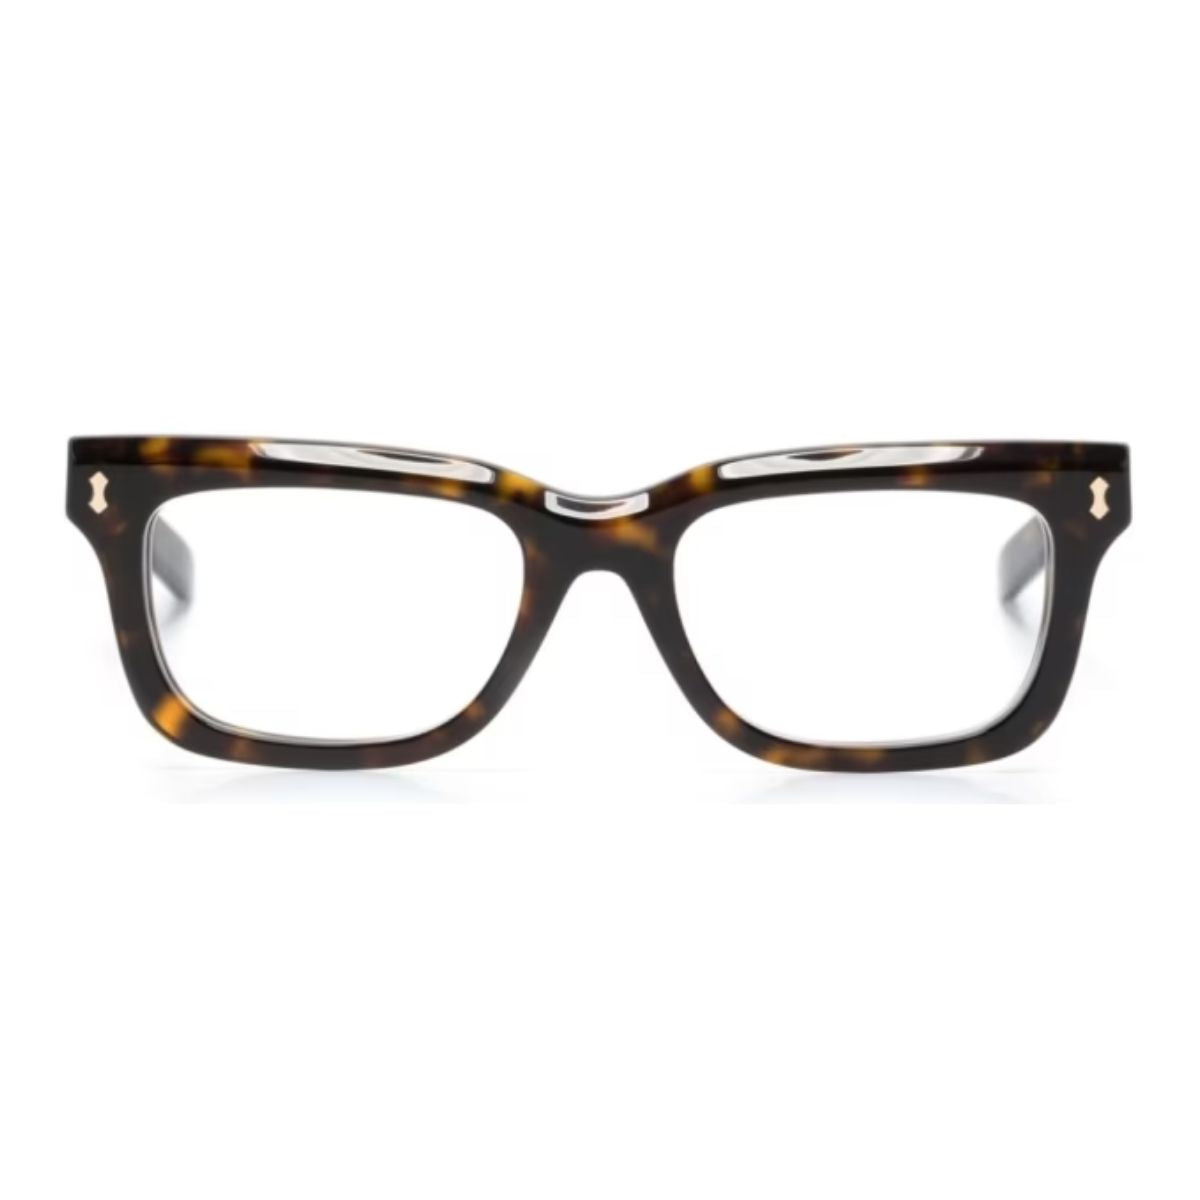 "Optorium: Your Destination for Gucci 1522O 006 Unisex Frames - Ideal for Men and Women"